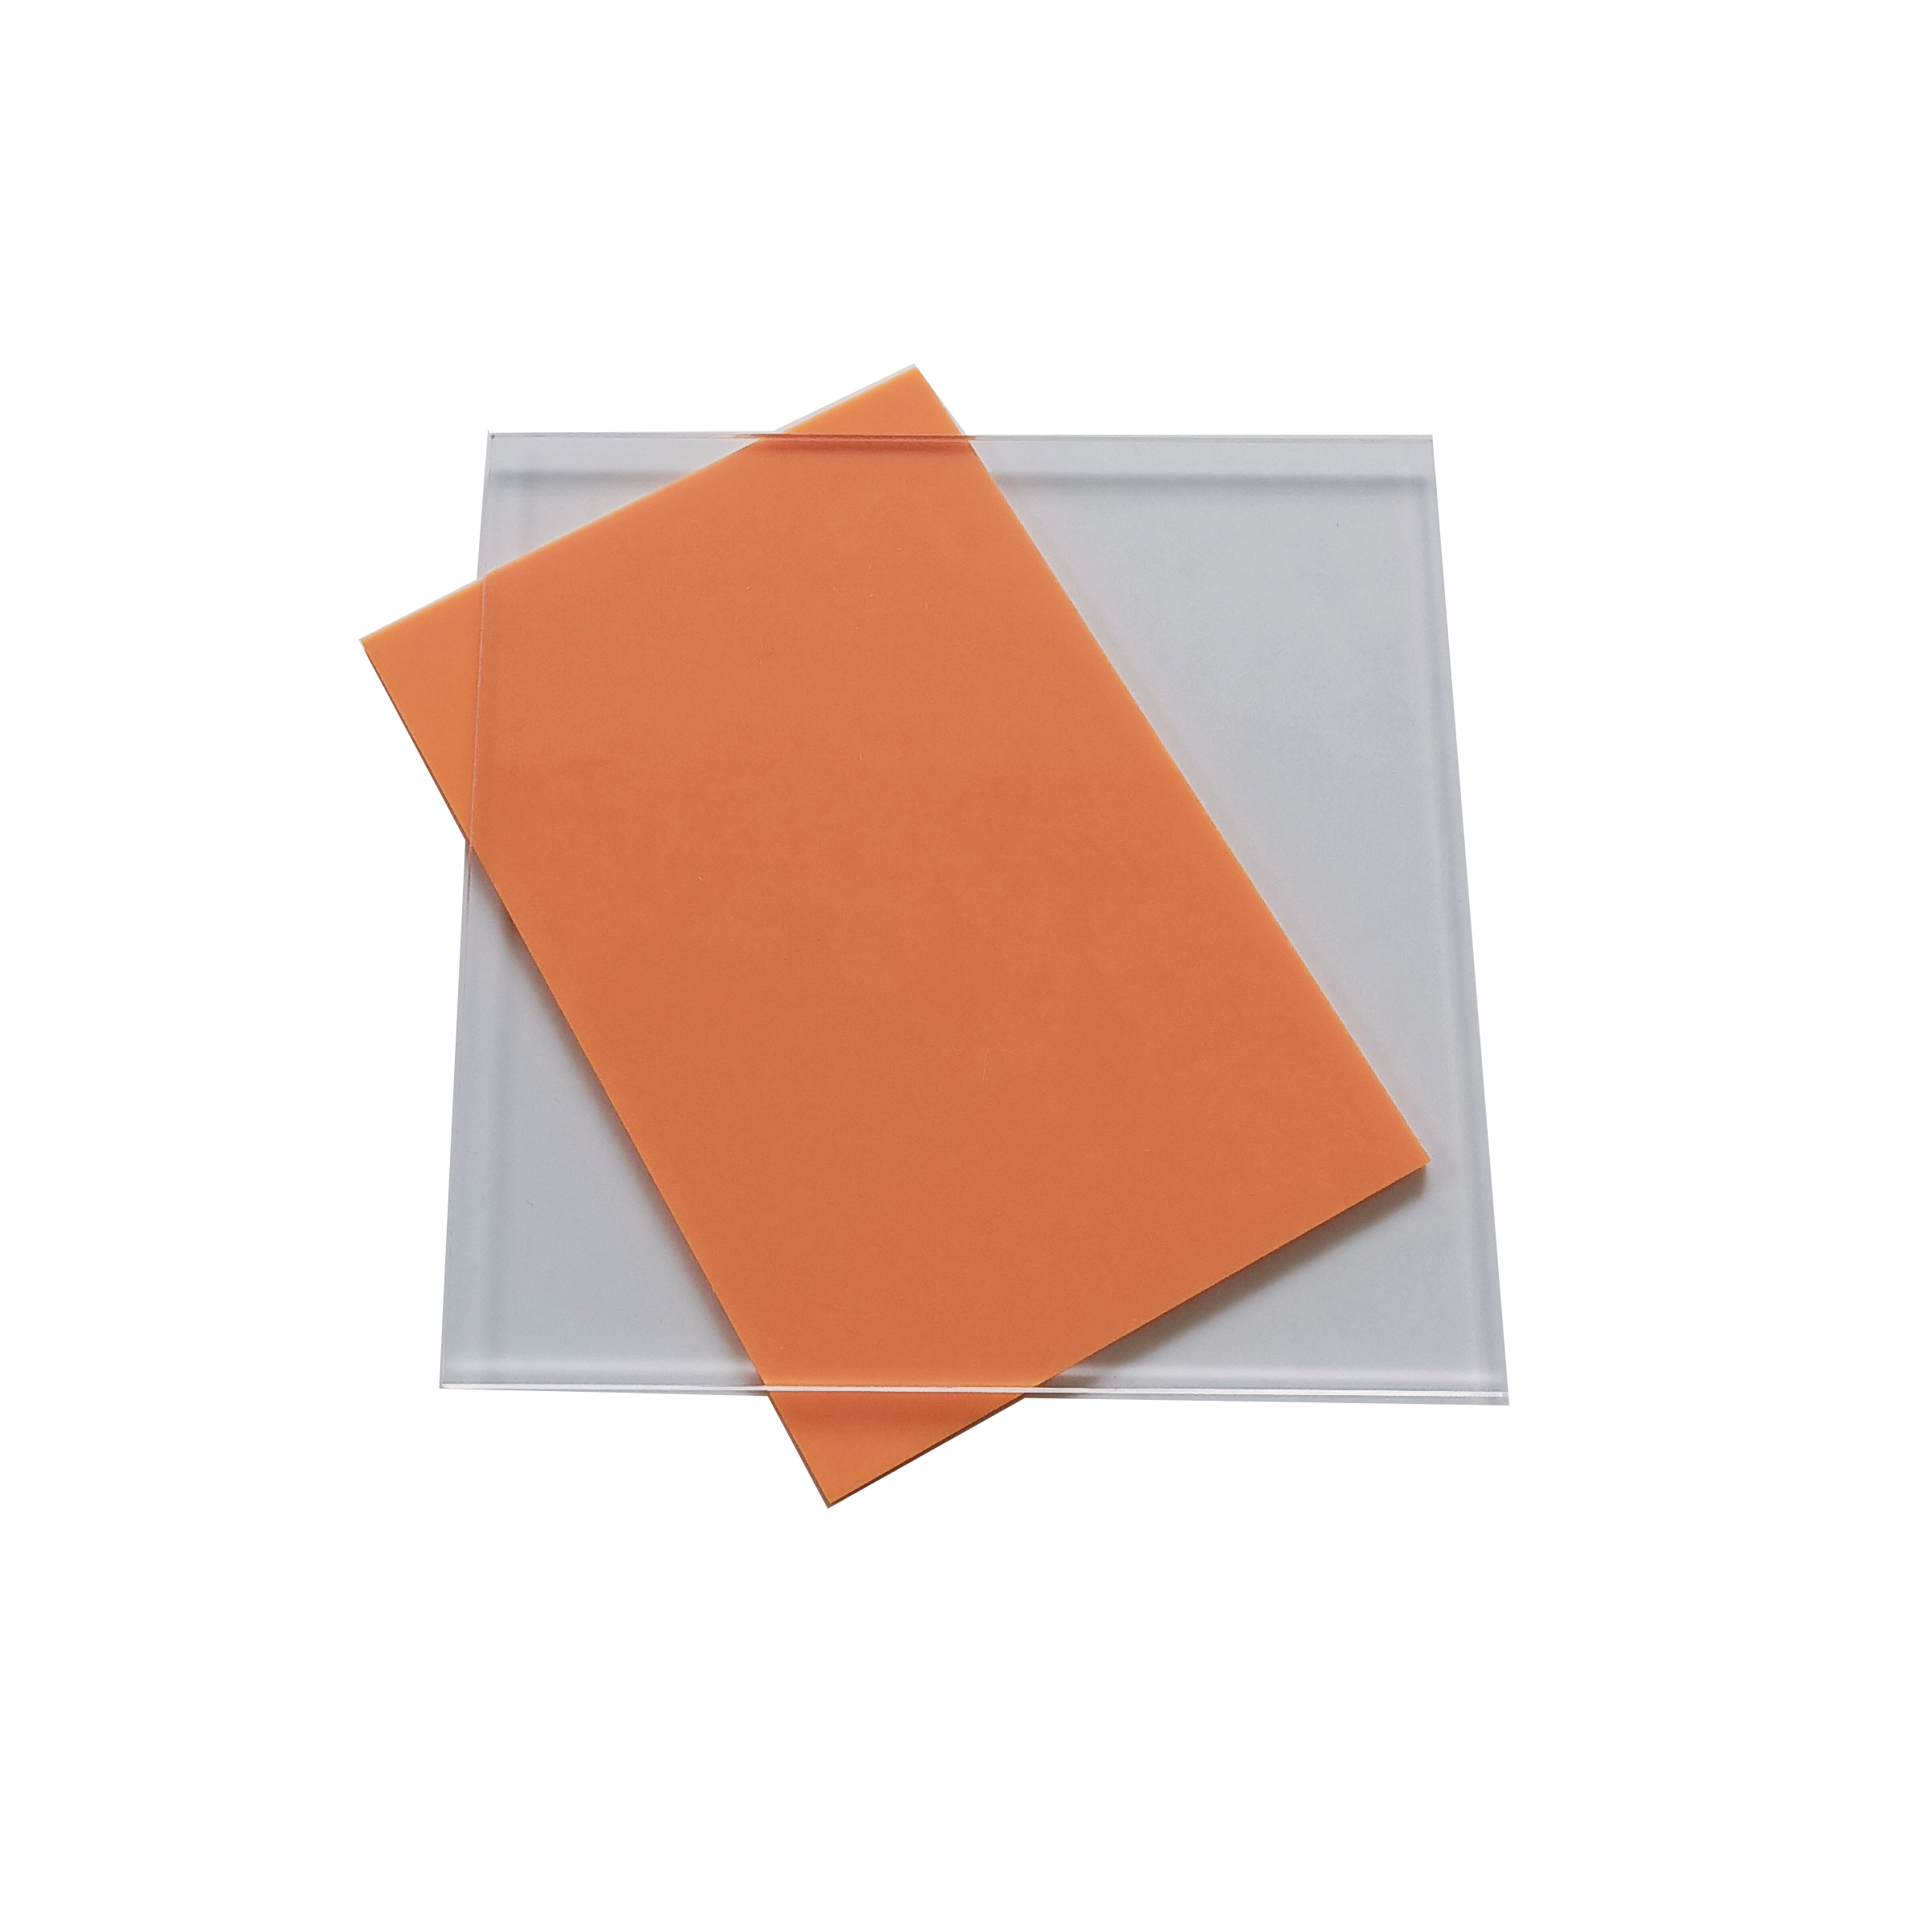 Acrylic Sheets 12x12x1/4 Color Acrylic Sheets for Laser Cutting Flexible Plastic Acrylic Sheets